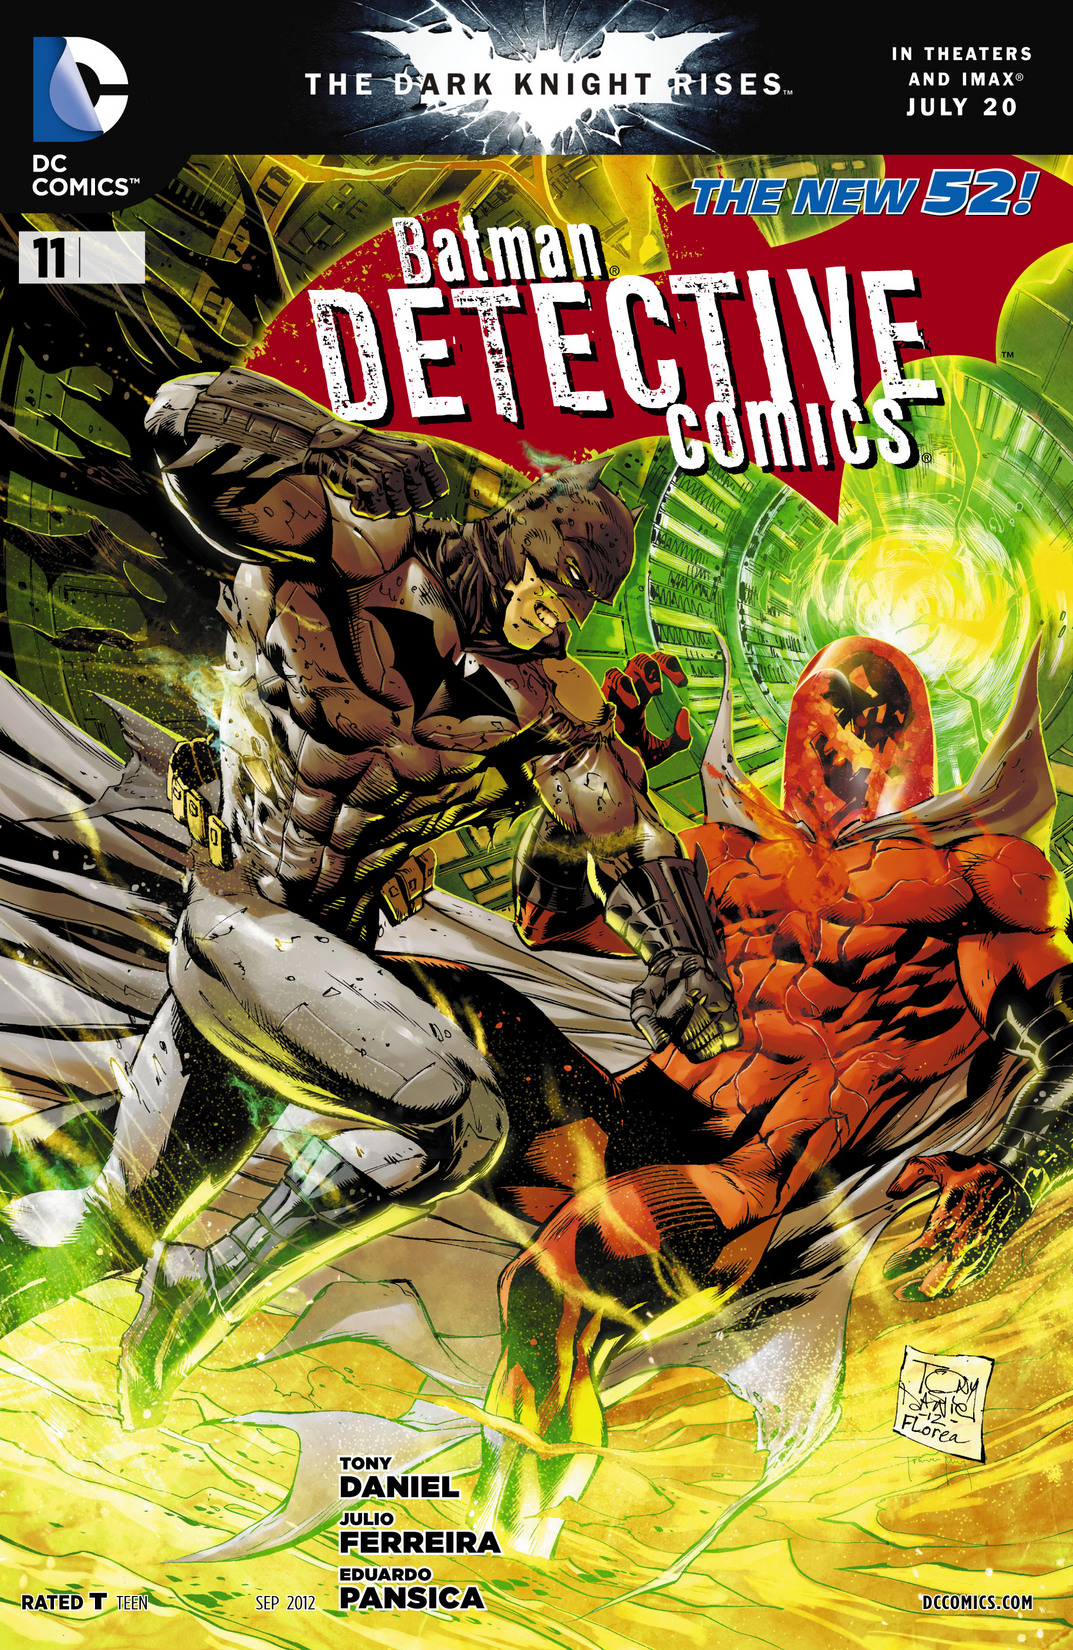 Getting Into DC Comics: Justice League Titles (New 52) - HobbyLark